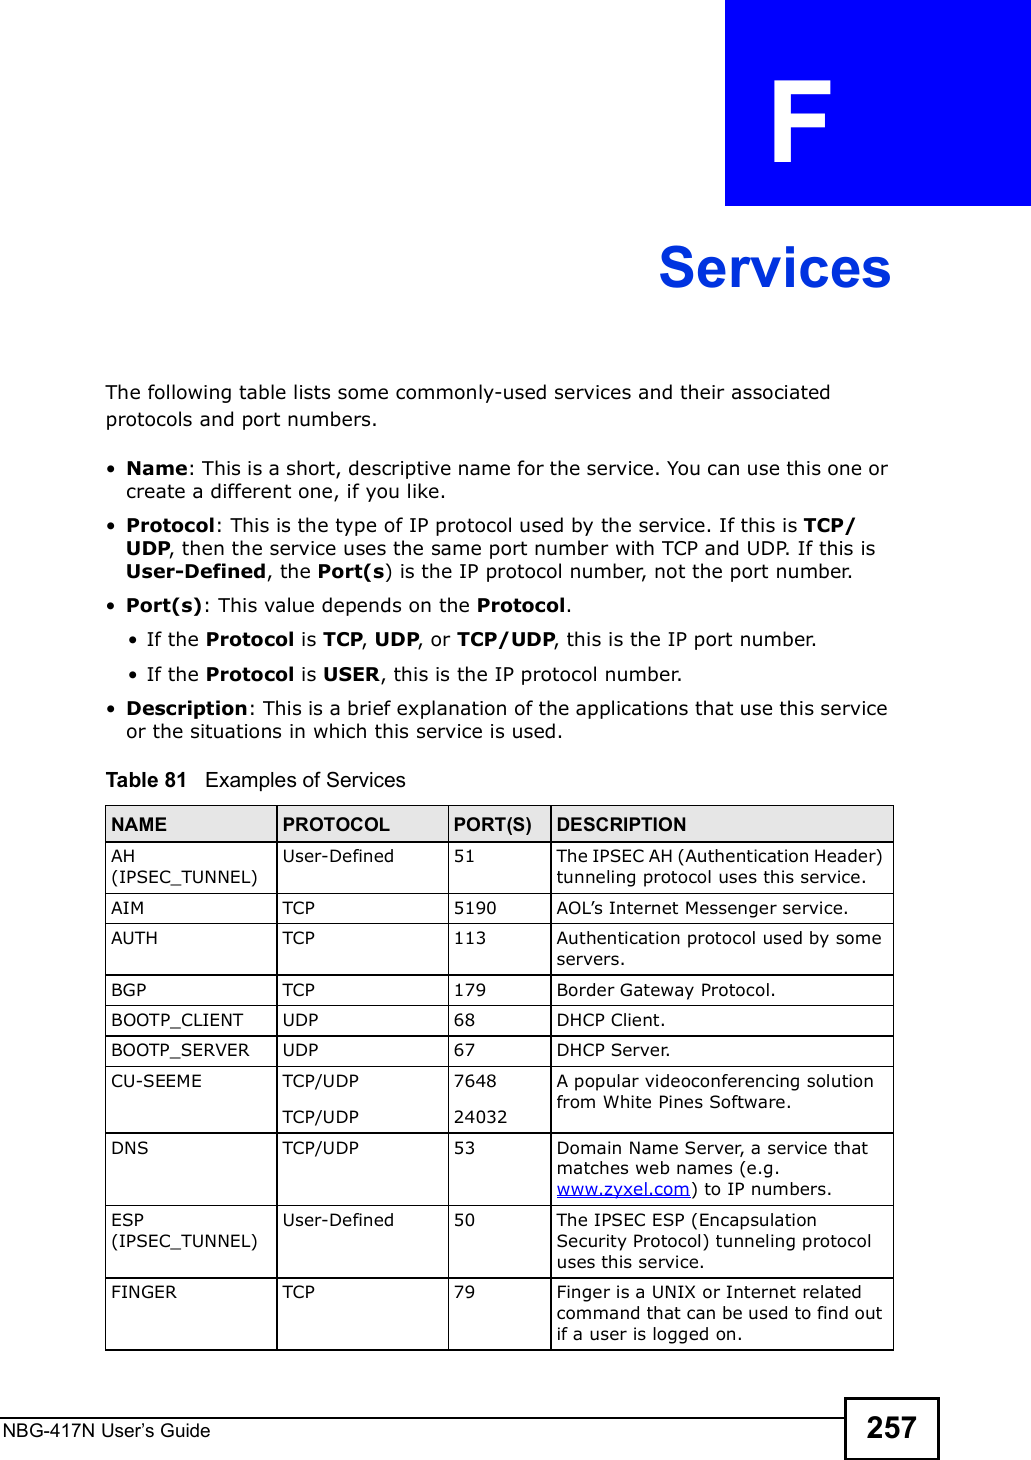 NBG-417N User s Guide 257APPENDIX  F ServicesThe following table lists some commonly-used services and their associated protocols and port numbers. Name: This is a short, descriptive name for the service. You can use this one or create a different one, if you like. Protocol: This is the type of IP protocol used by the service. If this is TCP/UDP, then the service uses the same port number with TCP and UDP. If this is User-Defined, the Port(s) is the IP protocol number, not the port number. Port(s): This value depends on the Protocol. If the Protocol is TCP, UDP, or TCP/UDP, this is the IP port number. If the Protocol is USER, this is the IP protocol number. Description: This is a brief explanation of the applications that use this service or the situations in which this service is used.Table 81   Examples of ServicesNAME PROTOCOL PORT(S) DESCRIPTIONAH (IPSEC_TUNNEL)User-Defined 51 The IPSEC AH (Authentication Header) tunneling protocol uses this service.AIM TCP 5190 AOL!s Internet Messenger service.AUTH TCP 113 Authentication protocol used by some servers.BGP TCP 179 Border Gateway Protocol.BOOTP_CLIENT UDP 68 DHCP Client.BOOTP_SERVER UDP 67 DHCP Server.CU-SEEME TCP/UDPTCP/UDP 764824032A popular videoconferencing solution from White Pines Software.DNS TCP/UDP 53 Domain Name Server, a service that matches web names (e.g. www.zyxel.com) to IP numbers.ESP (IPSEC_TUNNEL)User-Defined 50 The IPSEC ESP (Encapsulation Security Protocol) tunneling protocol uses this service.FINGER TCP 79 Finger is a UNIX or Internet related command that can be used to find out if a user is logged on.